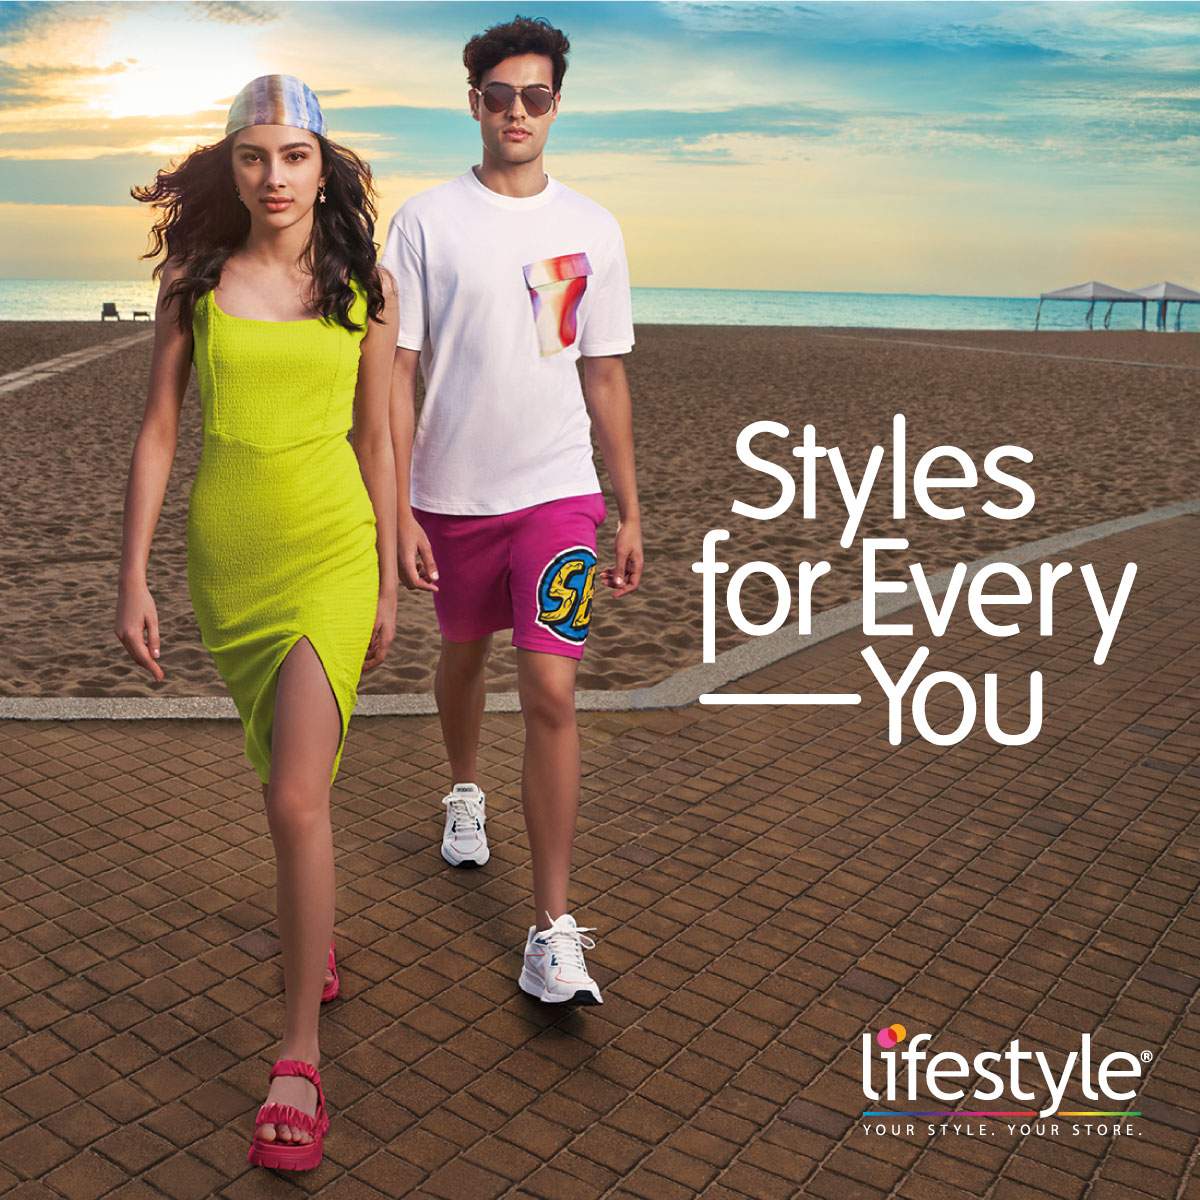 Styles For Every You, by Lifestyle